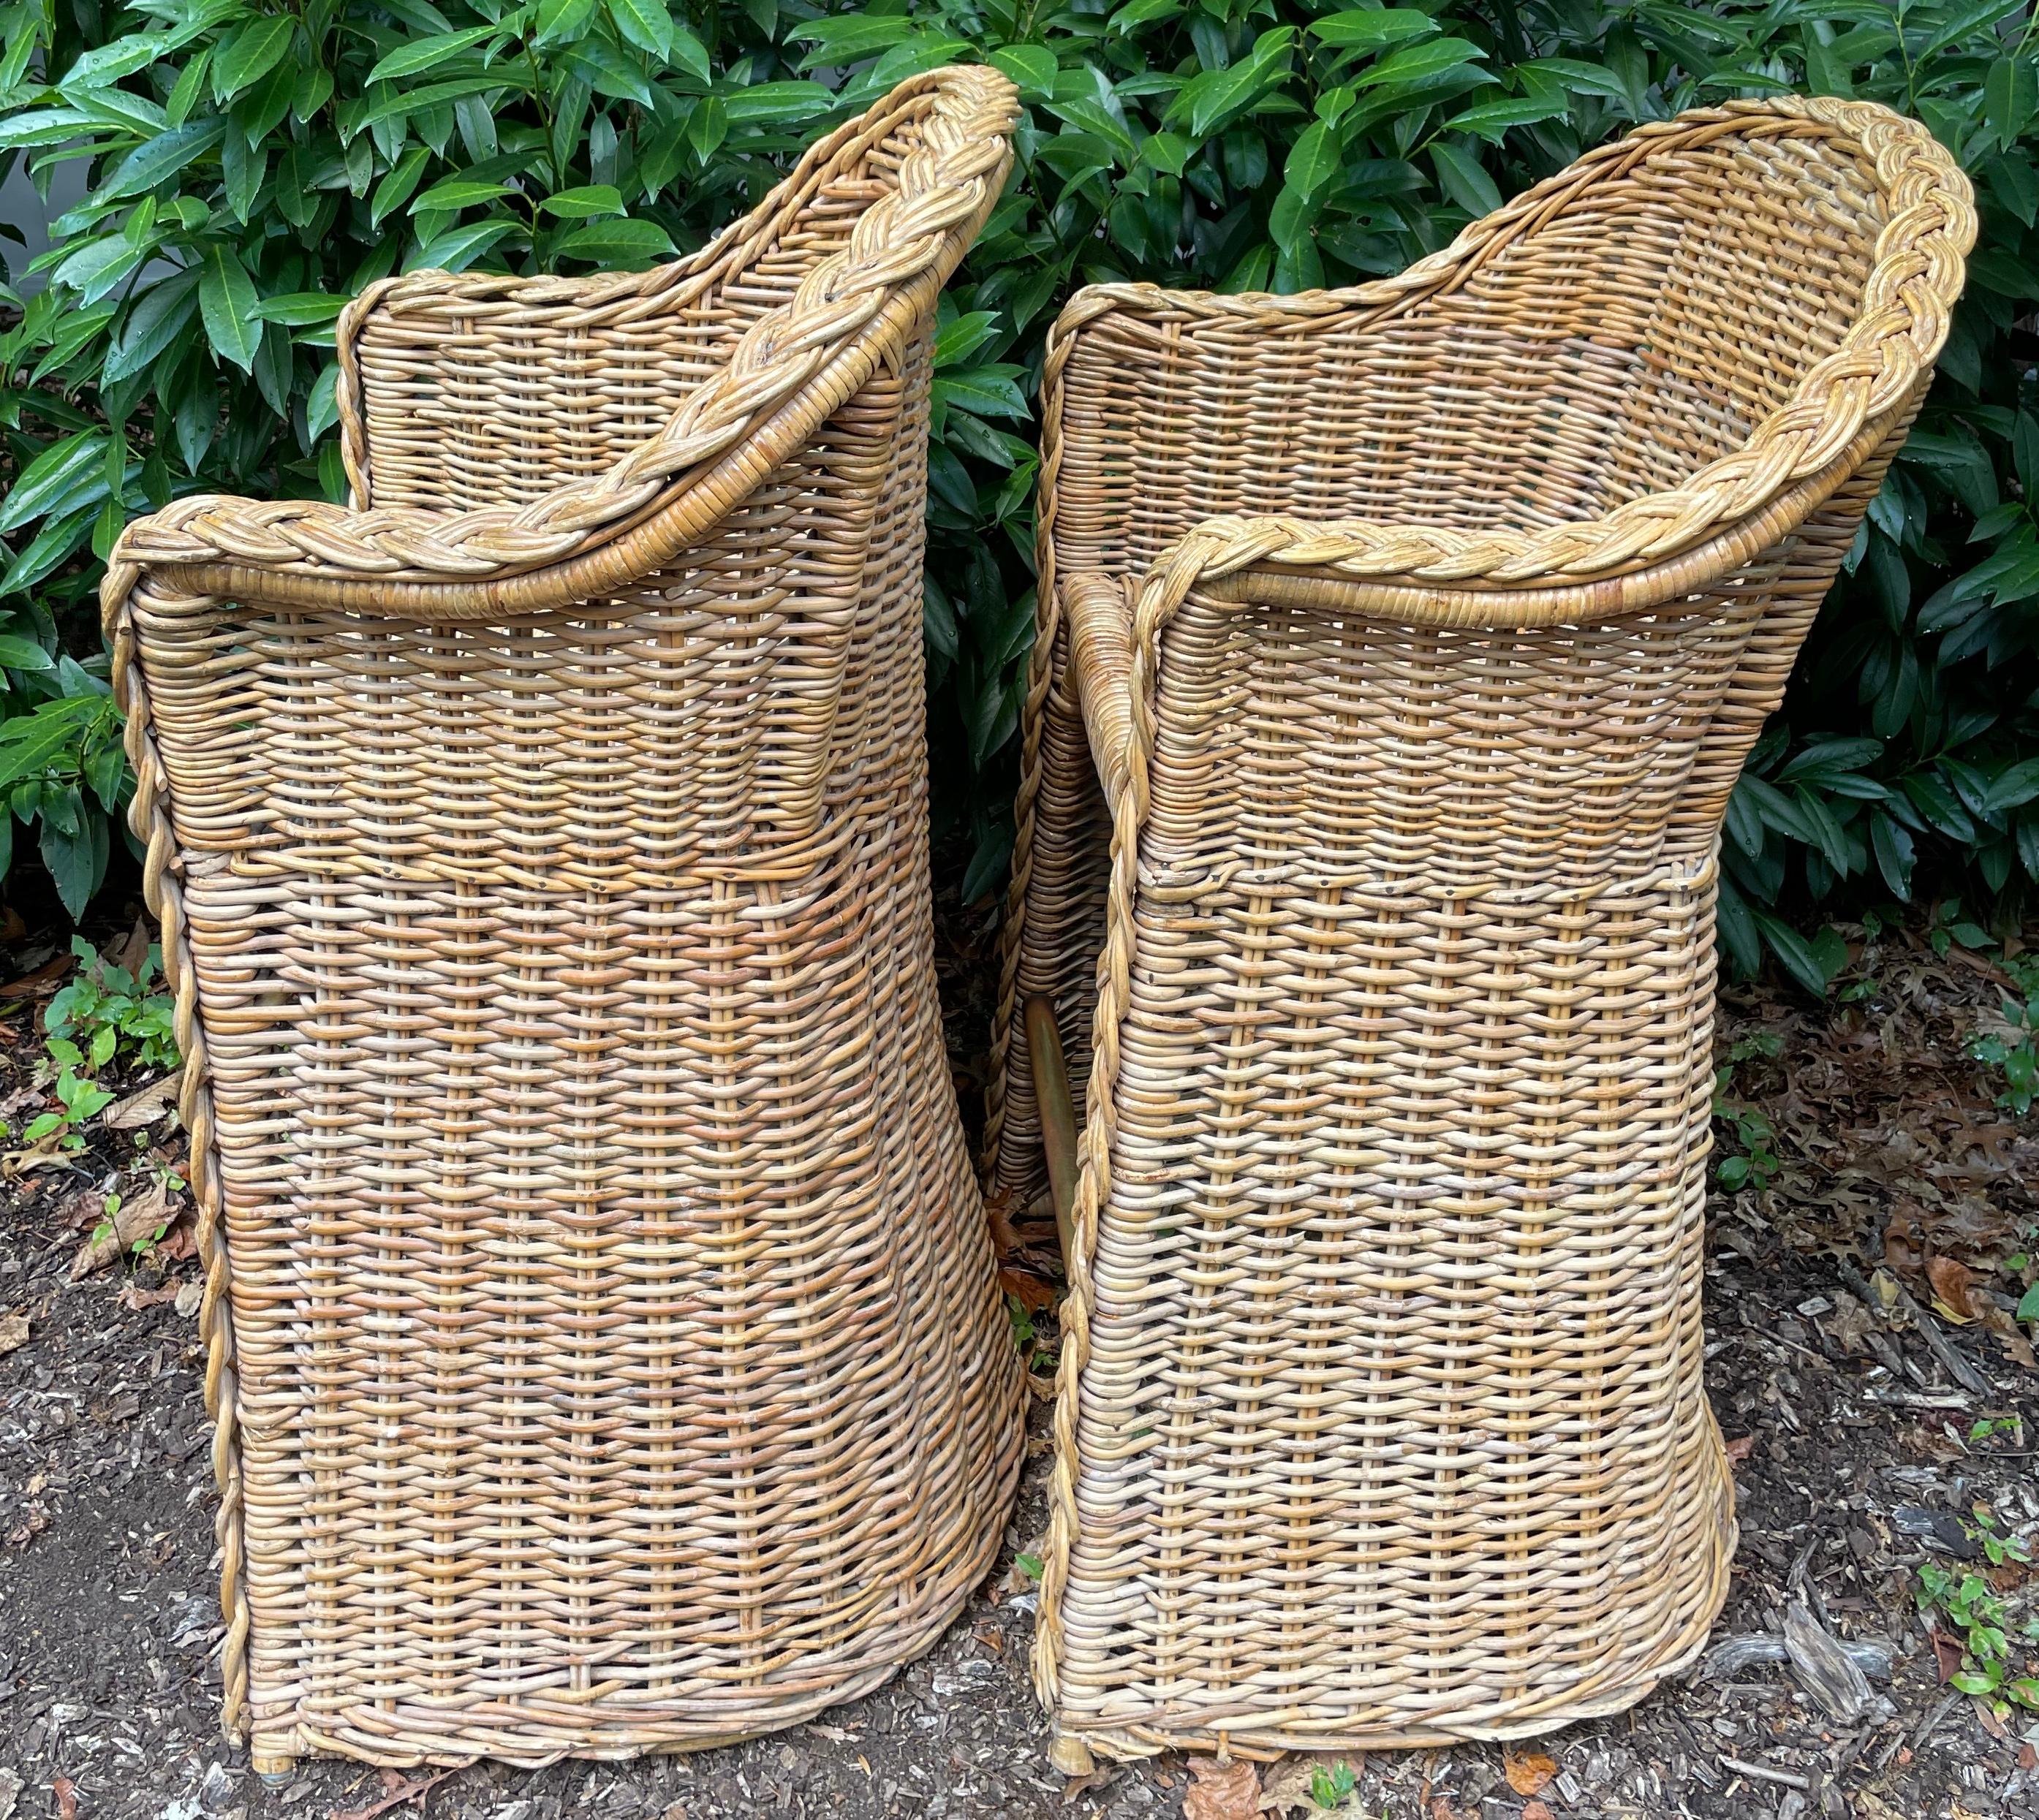 Pair wicker bar stools. Pair well made vintage wicker bar/counter stools with conforming arms and a brass rail foot rest in natural mellowed wicker. United States, Mid 20th century.
Dimensions: 42.5” H x 24” W x 23.5” Deep; seat height 27.5” H x